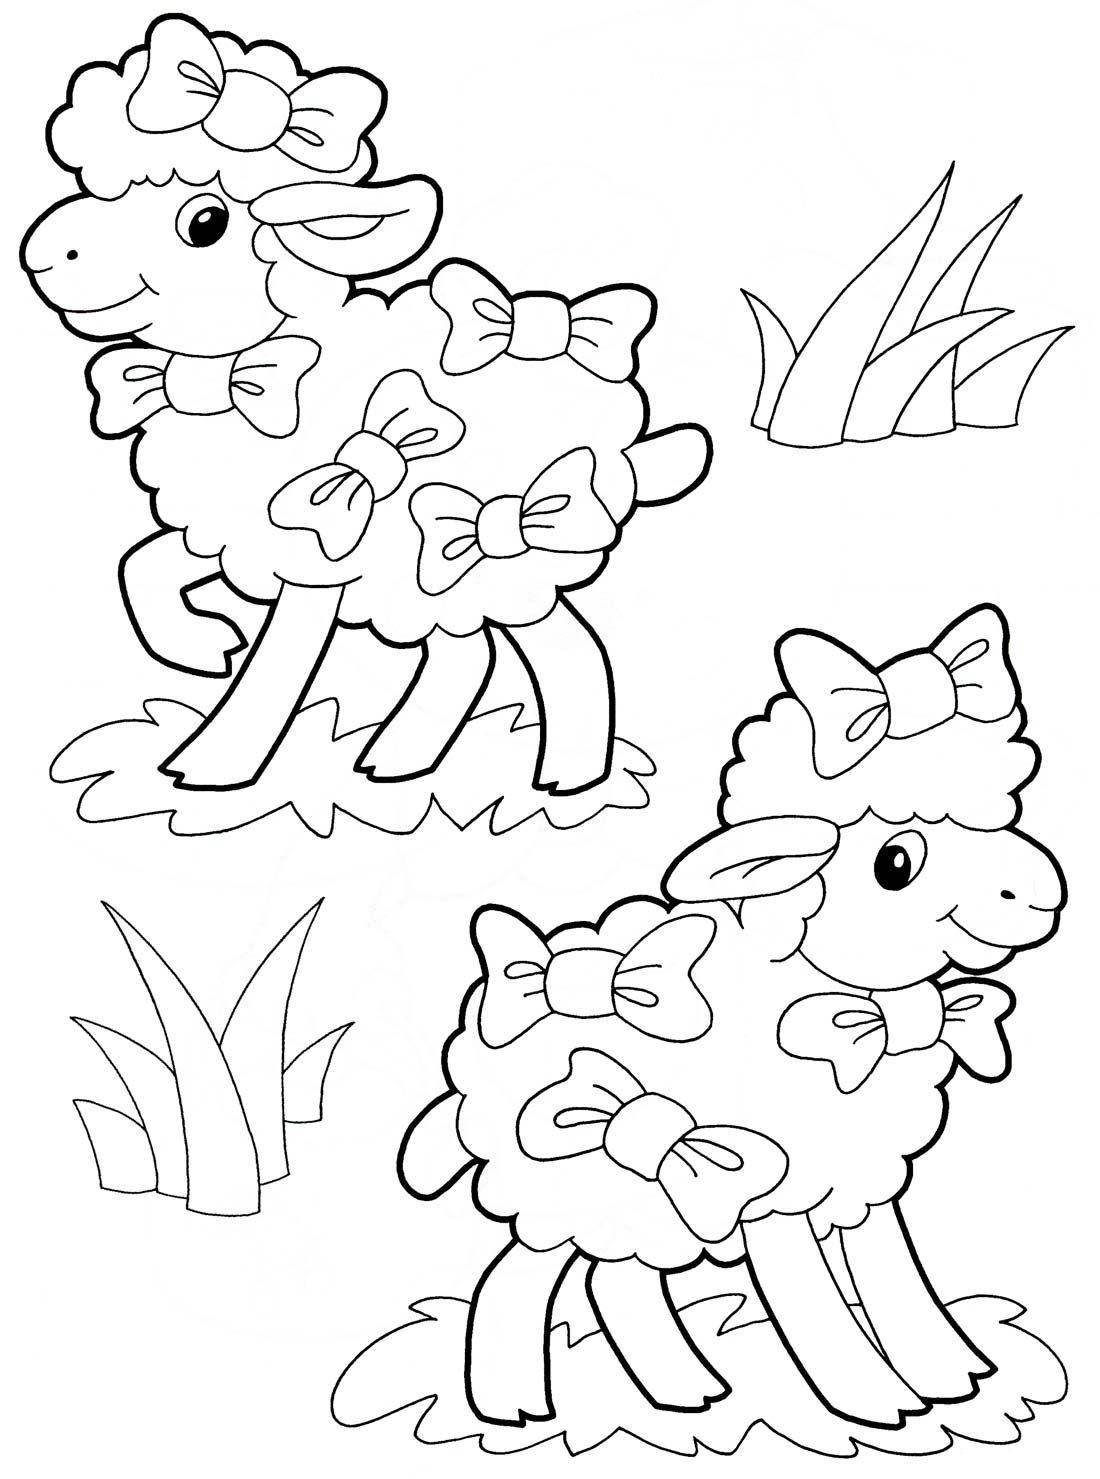 Coloring Drawing lambs with bows. Category Pets allowed. Tags:  RAM.